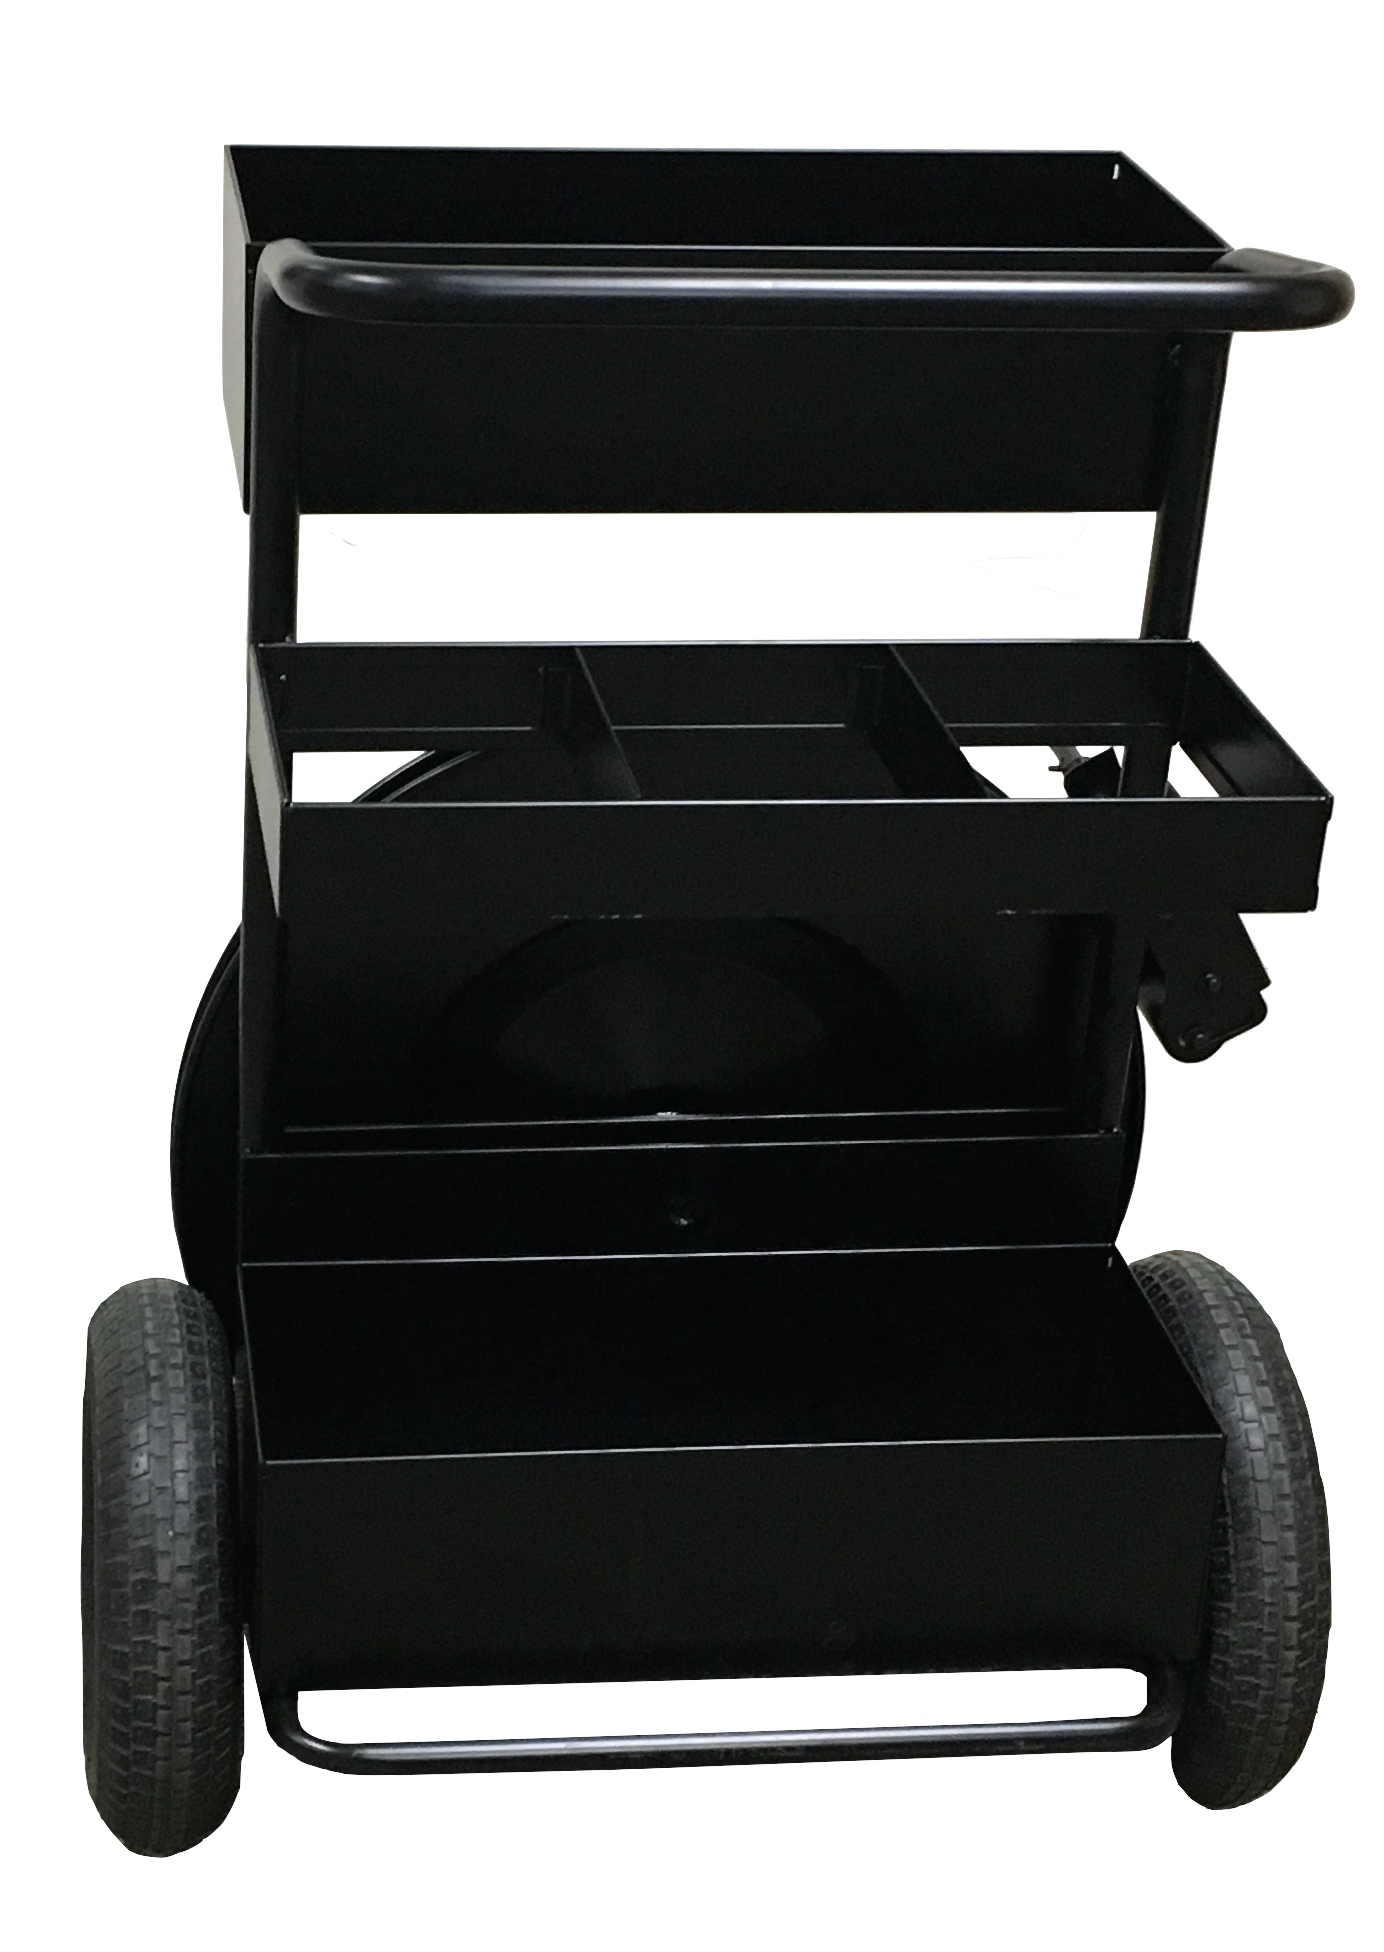 Monster Cart Heavy Duty Strapping Dispenser - Works with Poly and Steel Strapping - For 3/4", 1 1/4", and 2" Strap Widths - EP-3400 - Made in USA